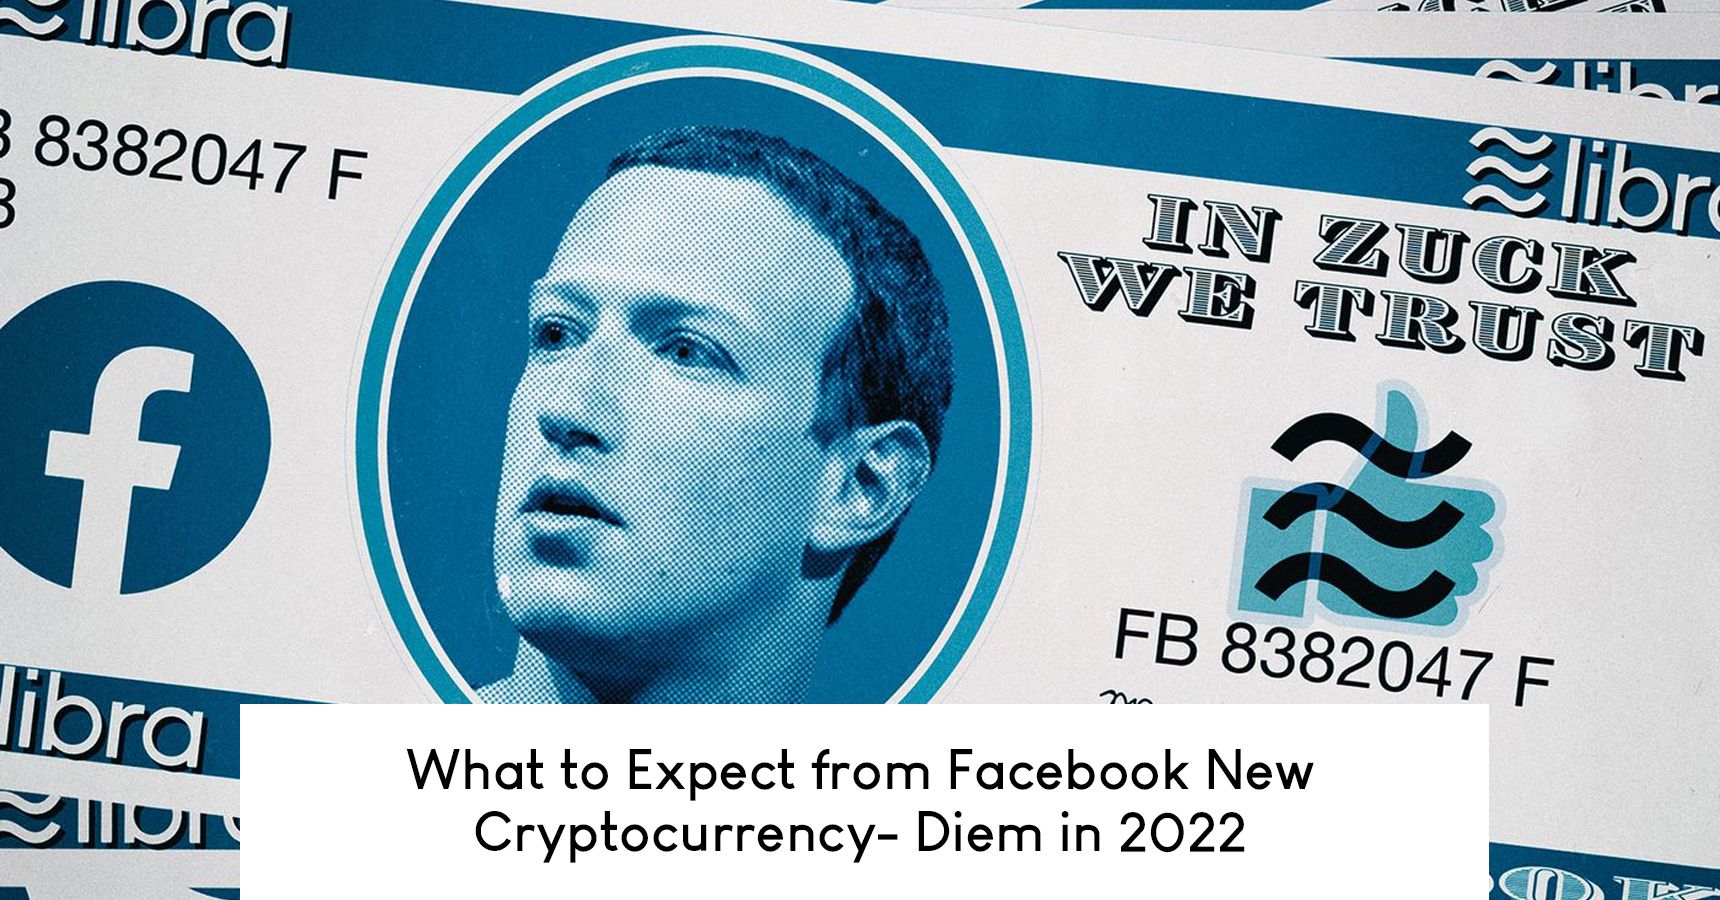 What to Expect from Facebook's New Cryptocurrency- Diem in 2022